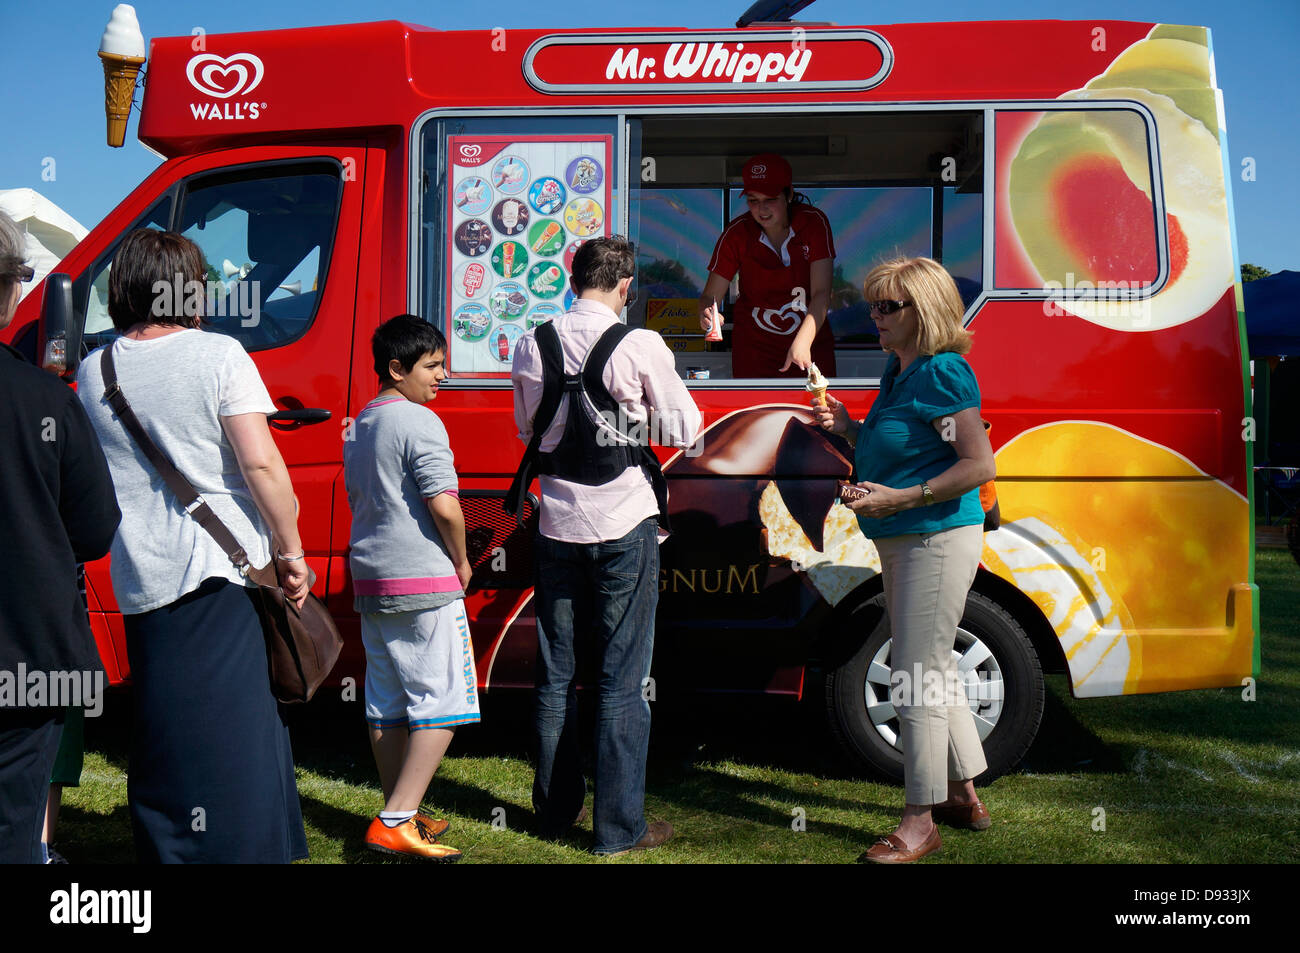 Customers queuing for traditional Wall's Mr Whippy ice cream, from a parked vehicle, outside on a hot summer day. England, UK. Stock Photo